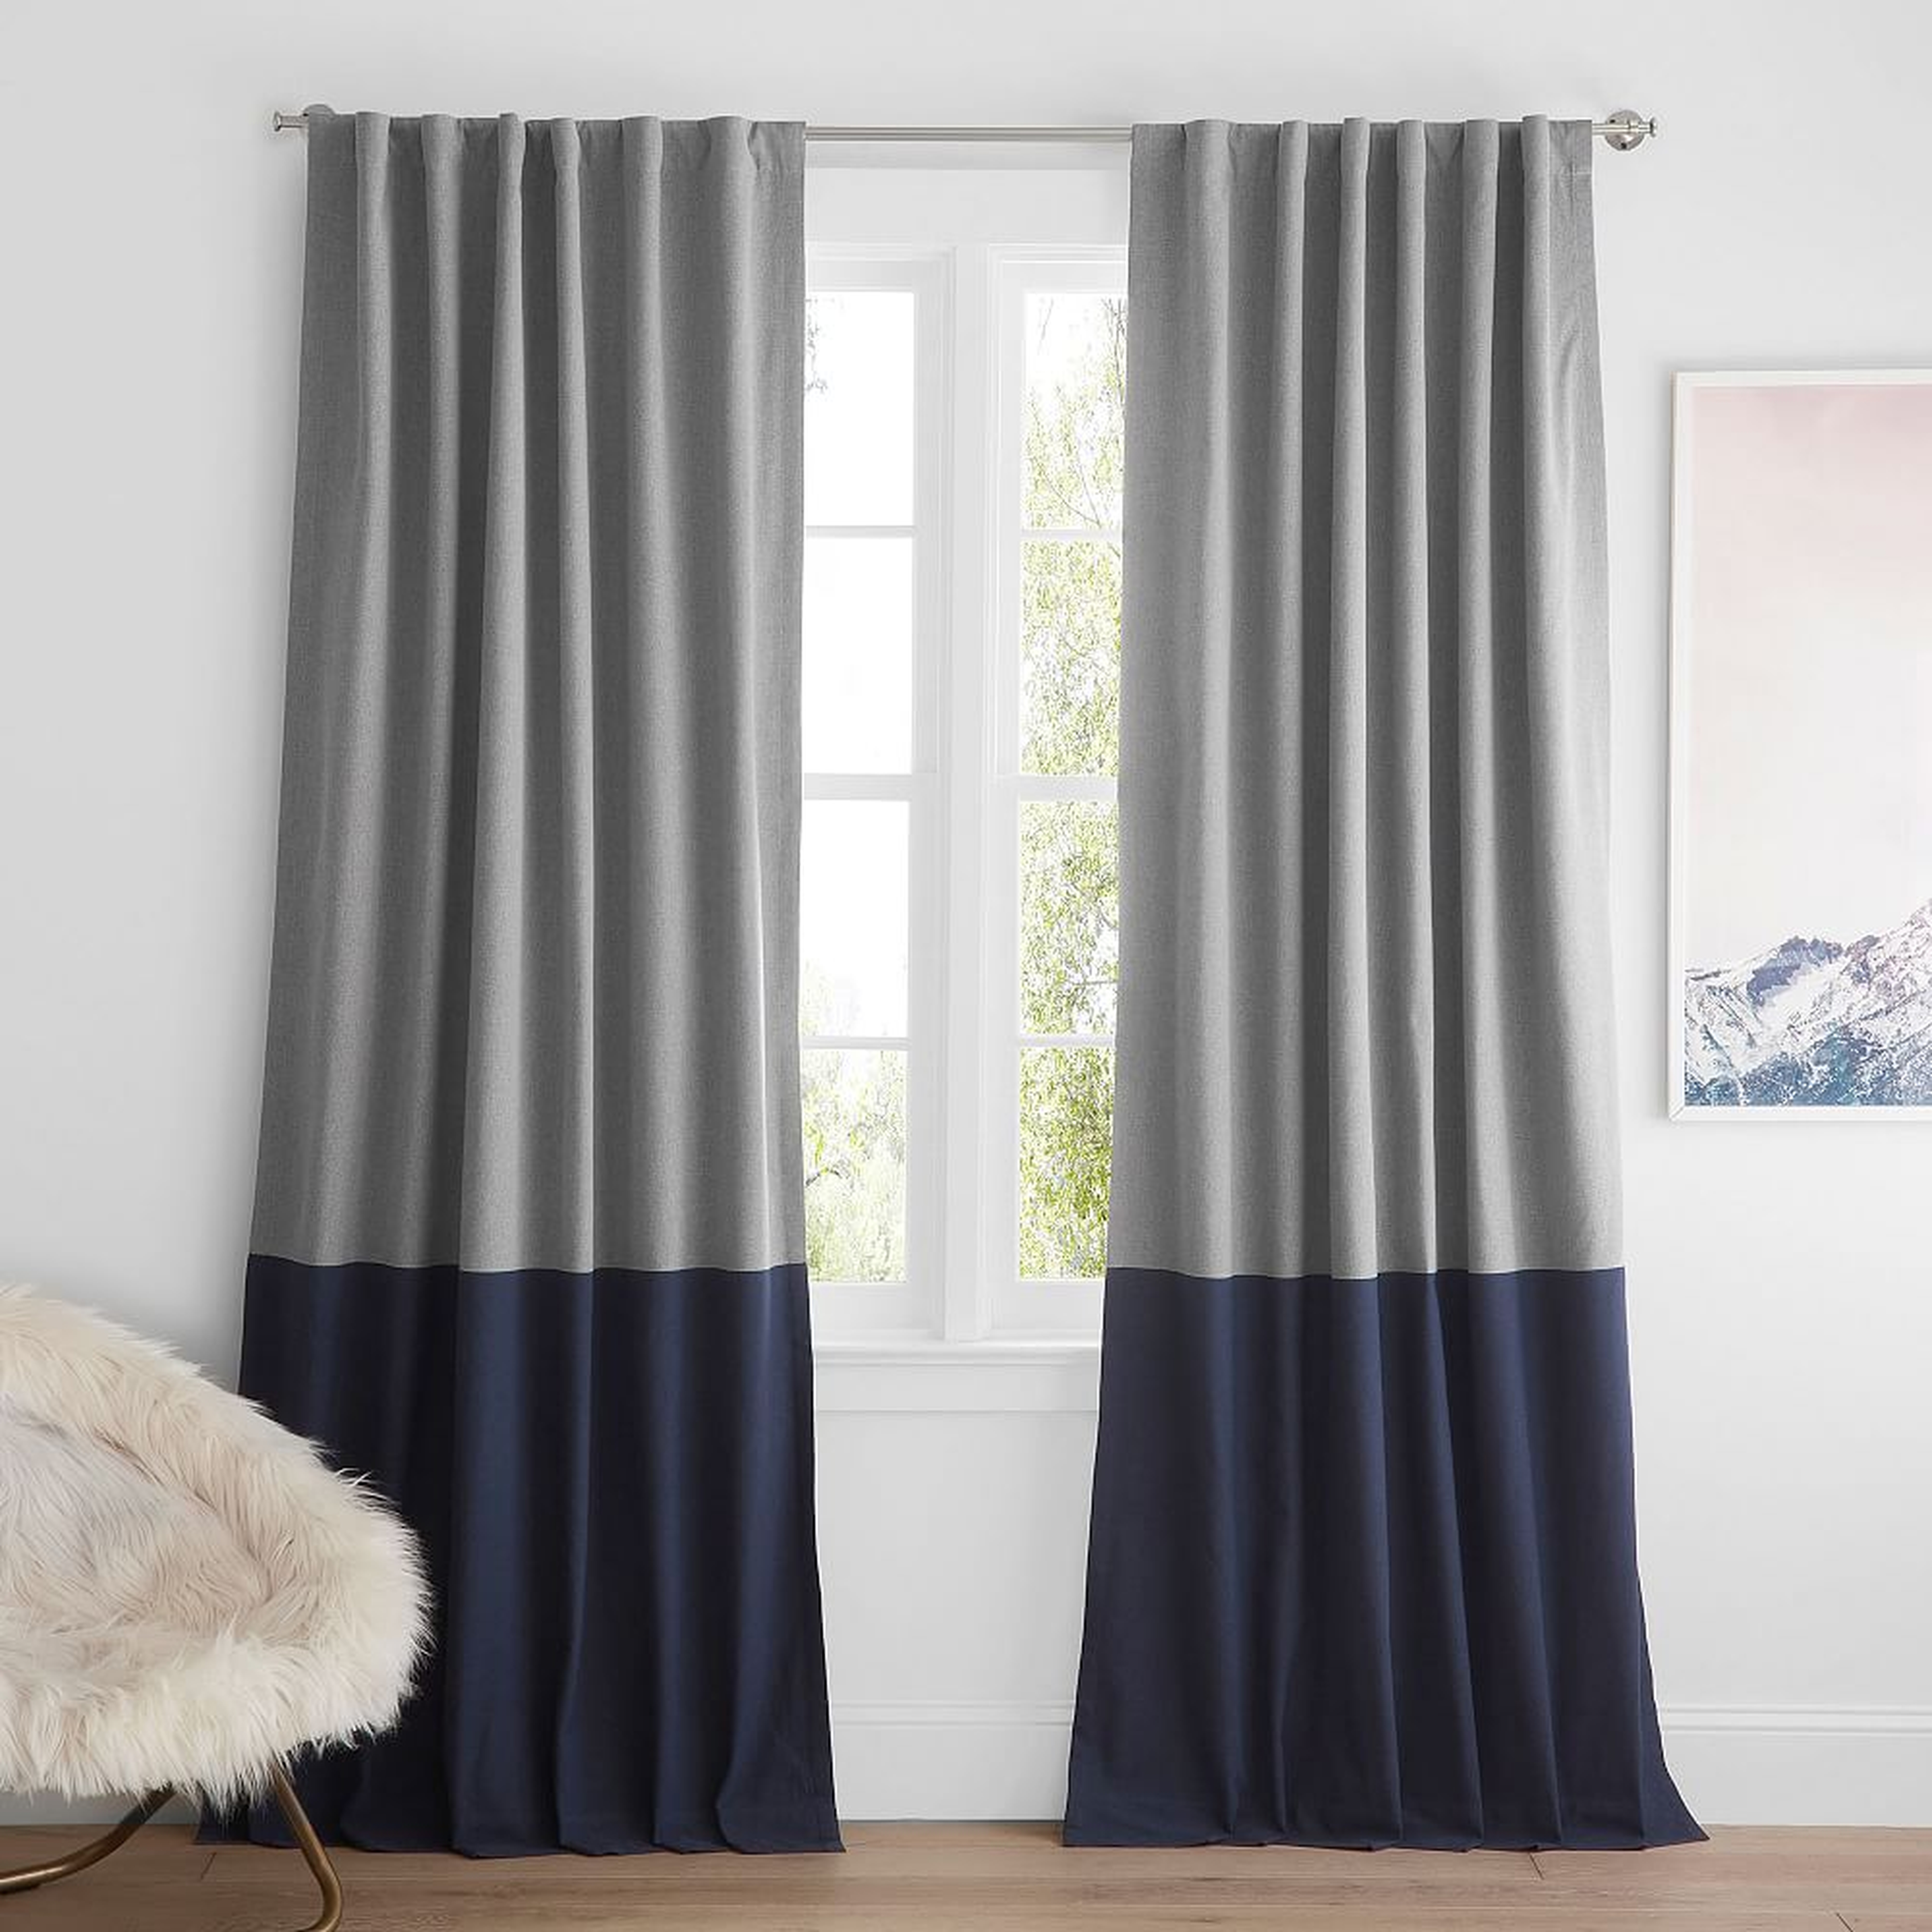 Recycled Cotton Color Block Blackout Curtain Set, Faded Navy, 52" x 84" - Pottery Barn Teen